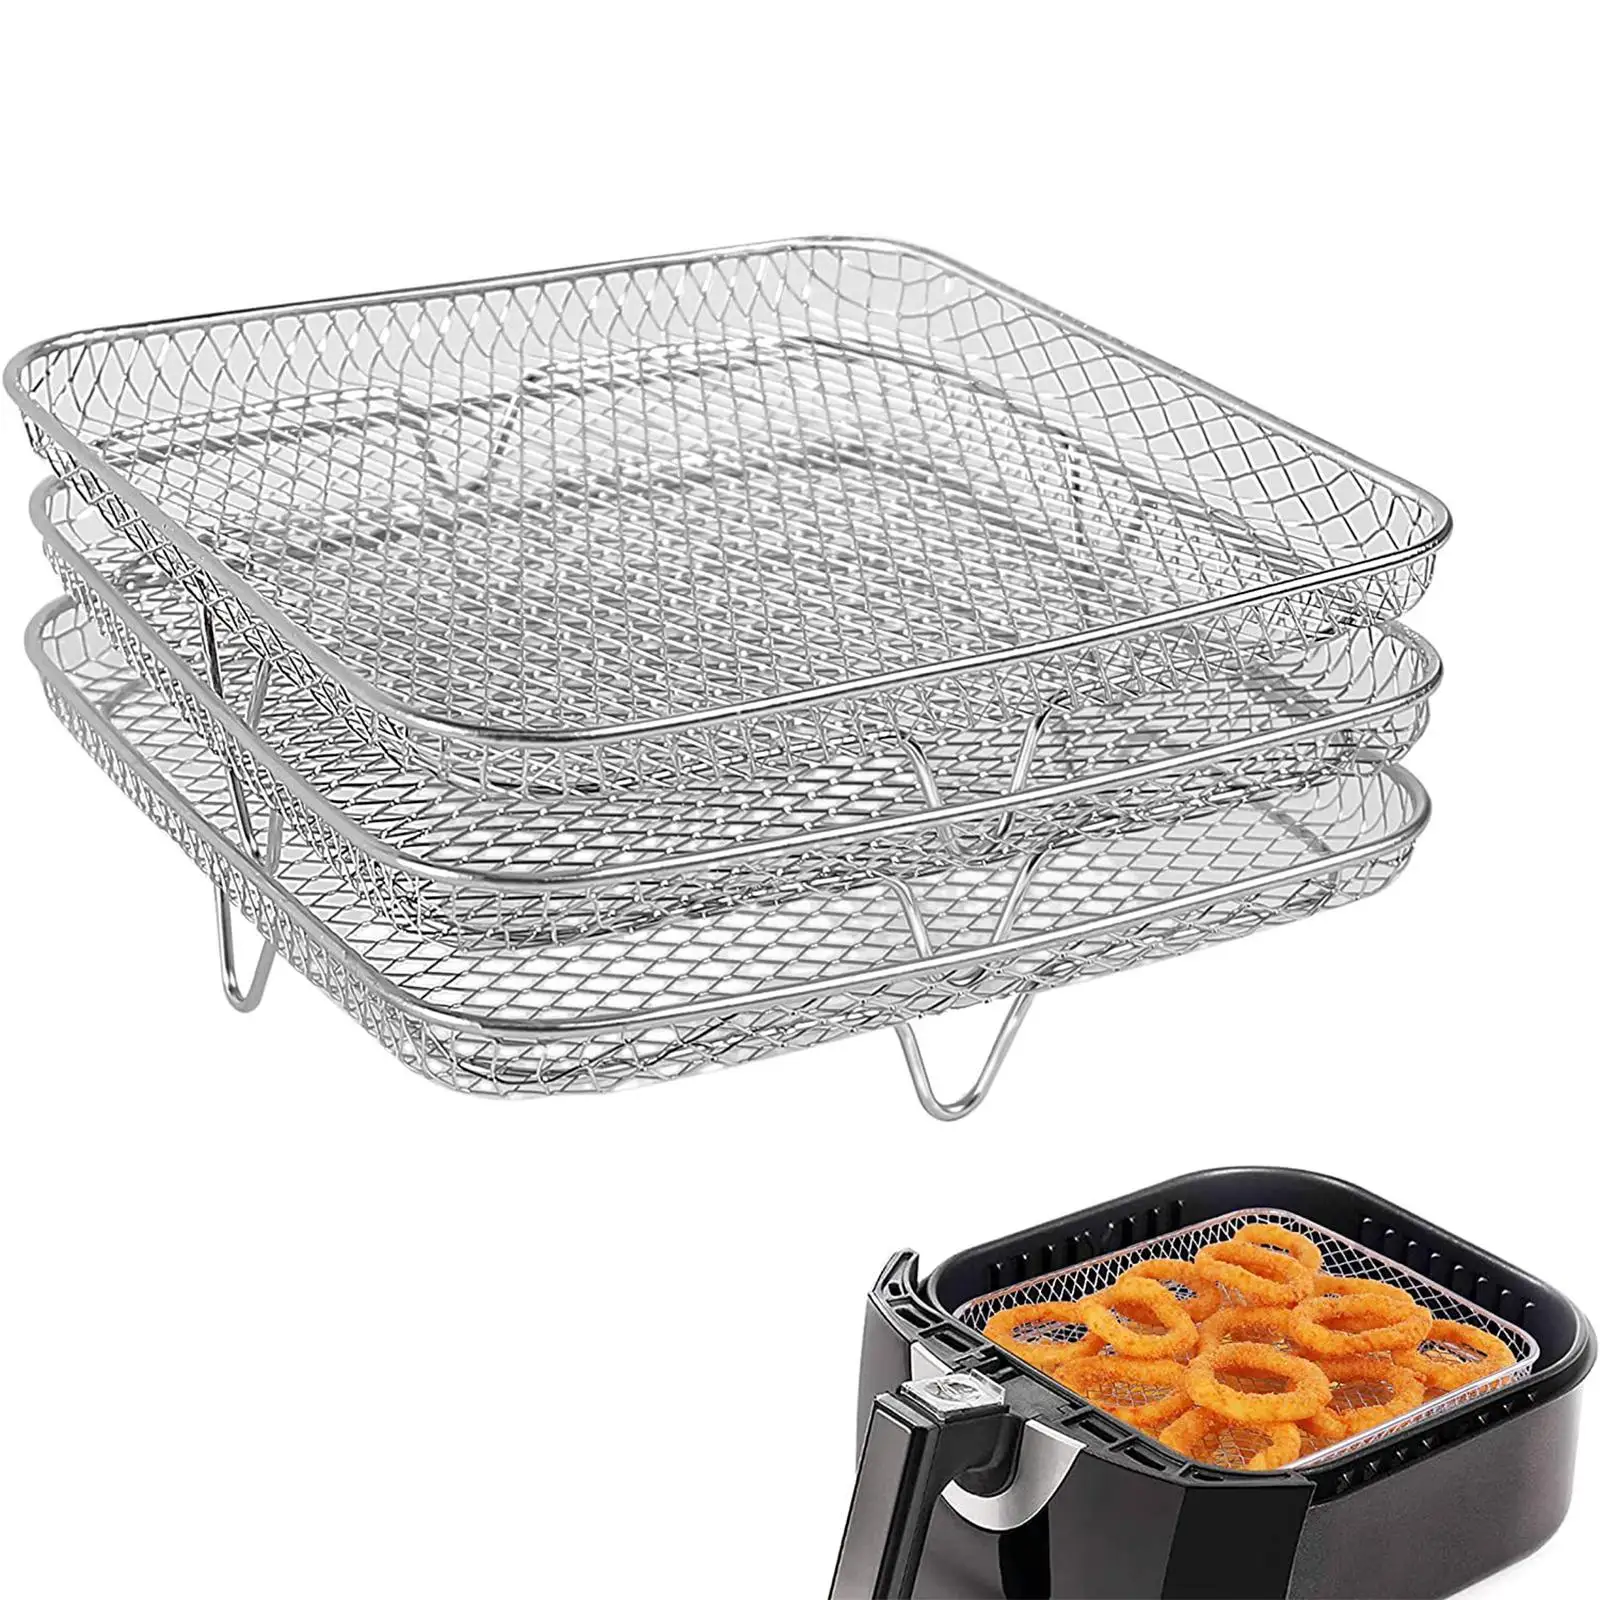 Rectangle Food Dehydrator Rack Easy Clean Stand Air Fryer Accessories Toast Rack, for Meats